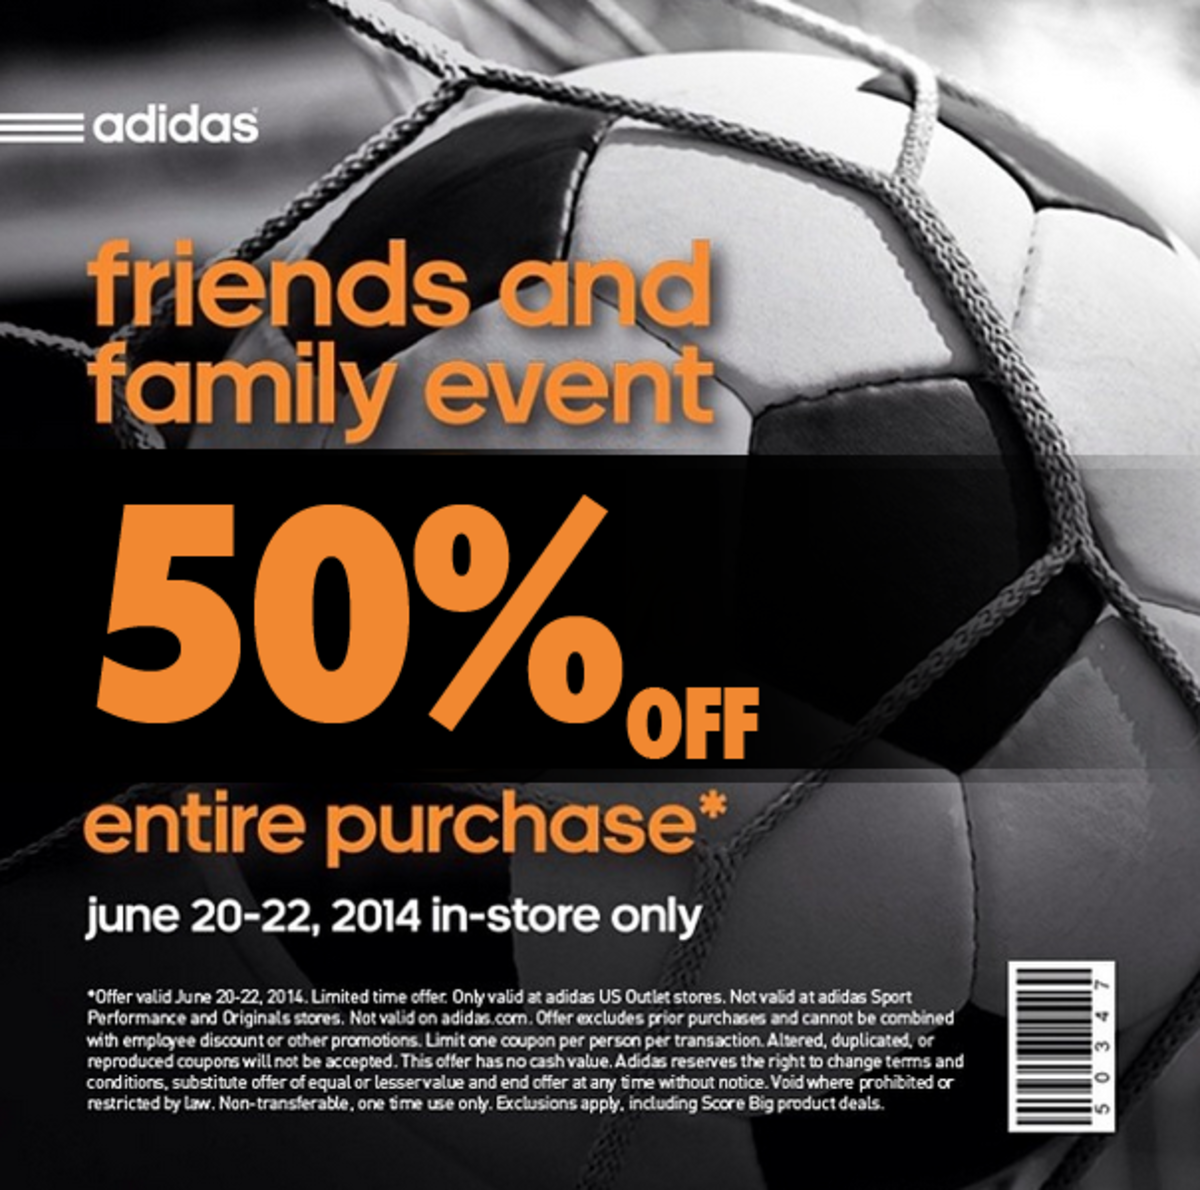 Adidas Outlet Offers 50% Off Entire 